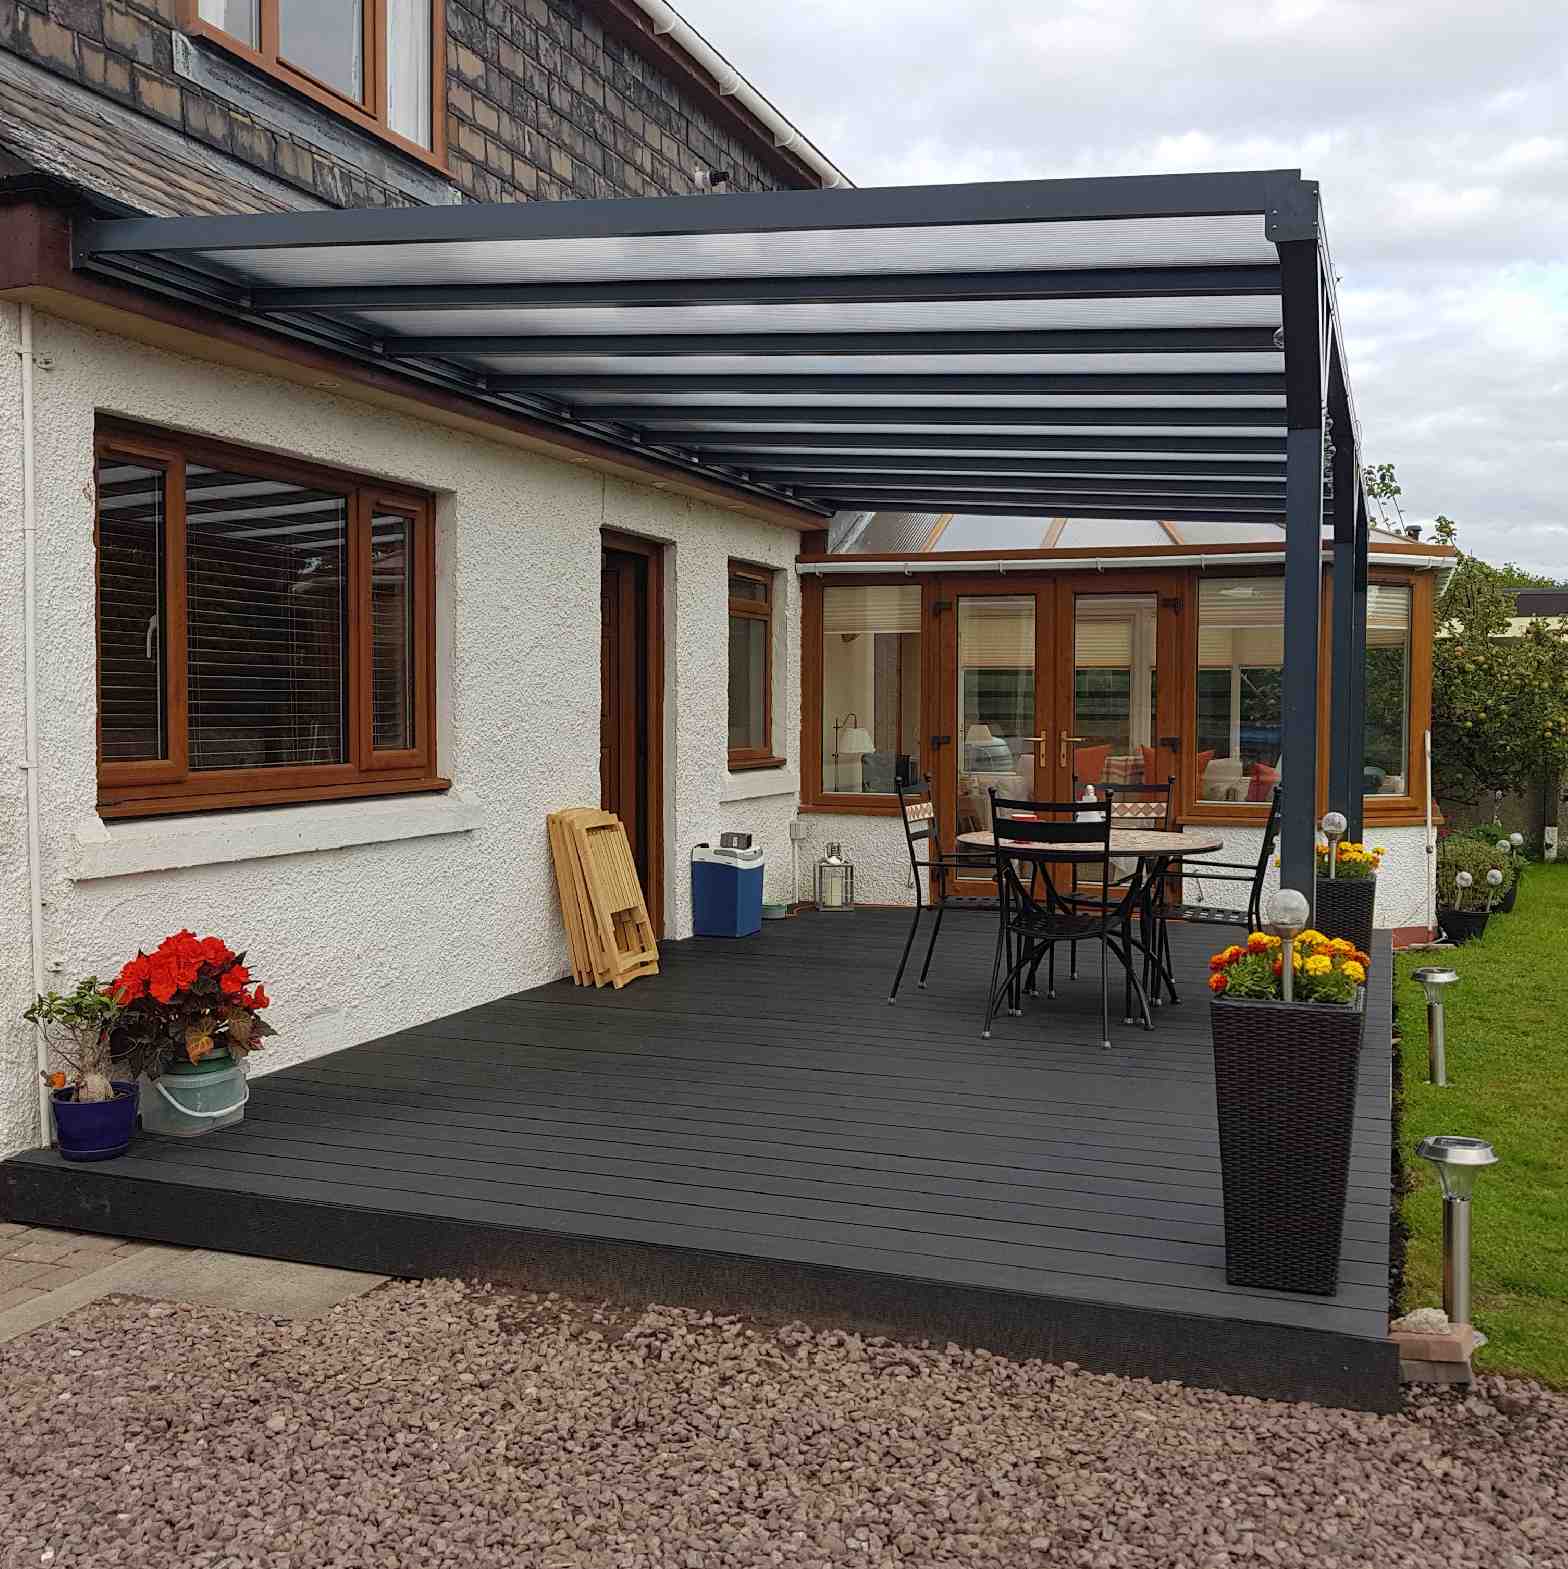 Buy Omega Verandah, Anthracite Grey, 16mm Polycarbonate Glazing - 6.0m (W) x 4.5m (P), (3) Supporting Posts online today